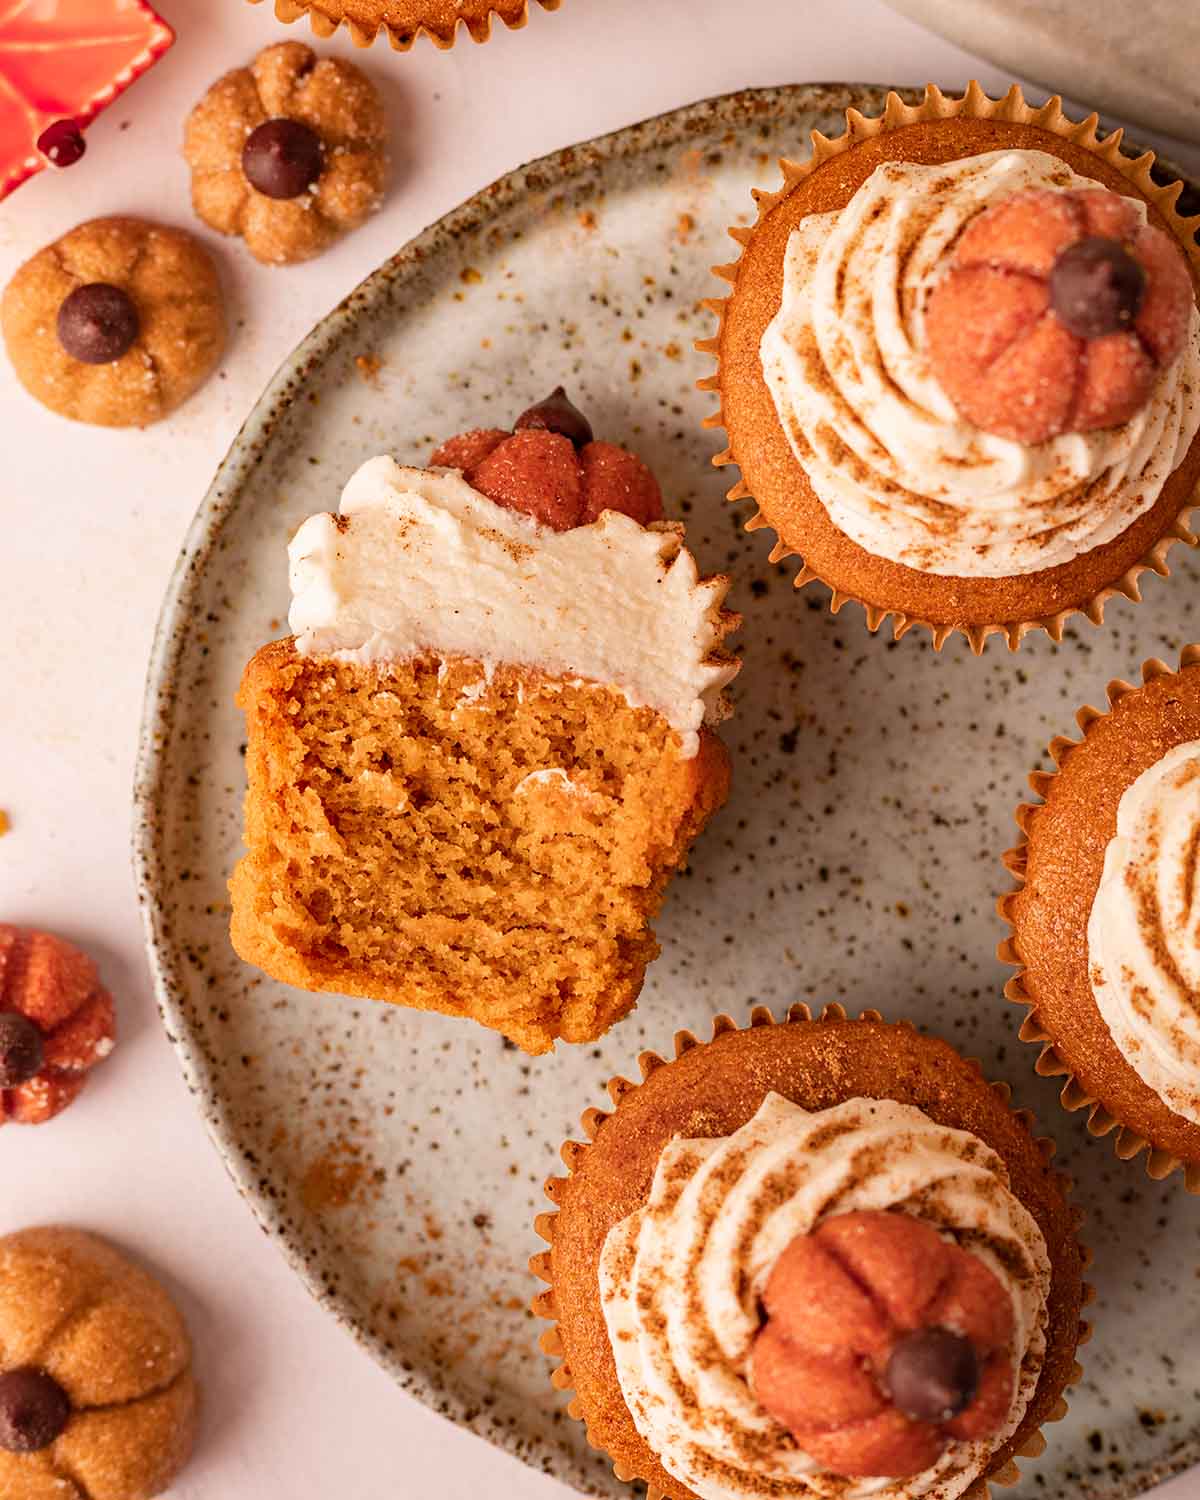 Half of a pumpkin cupcake on its side showing its fluffy texture. Cupcake is on plate with other cupcakes.